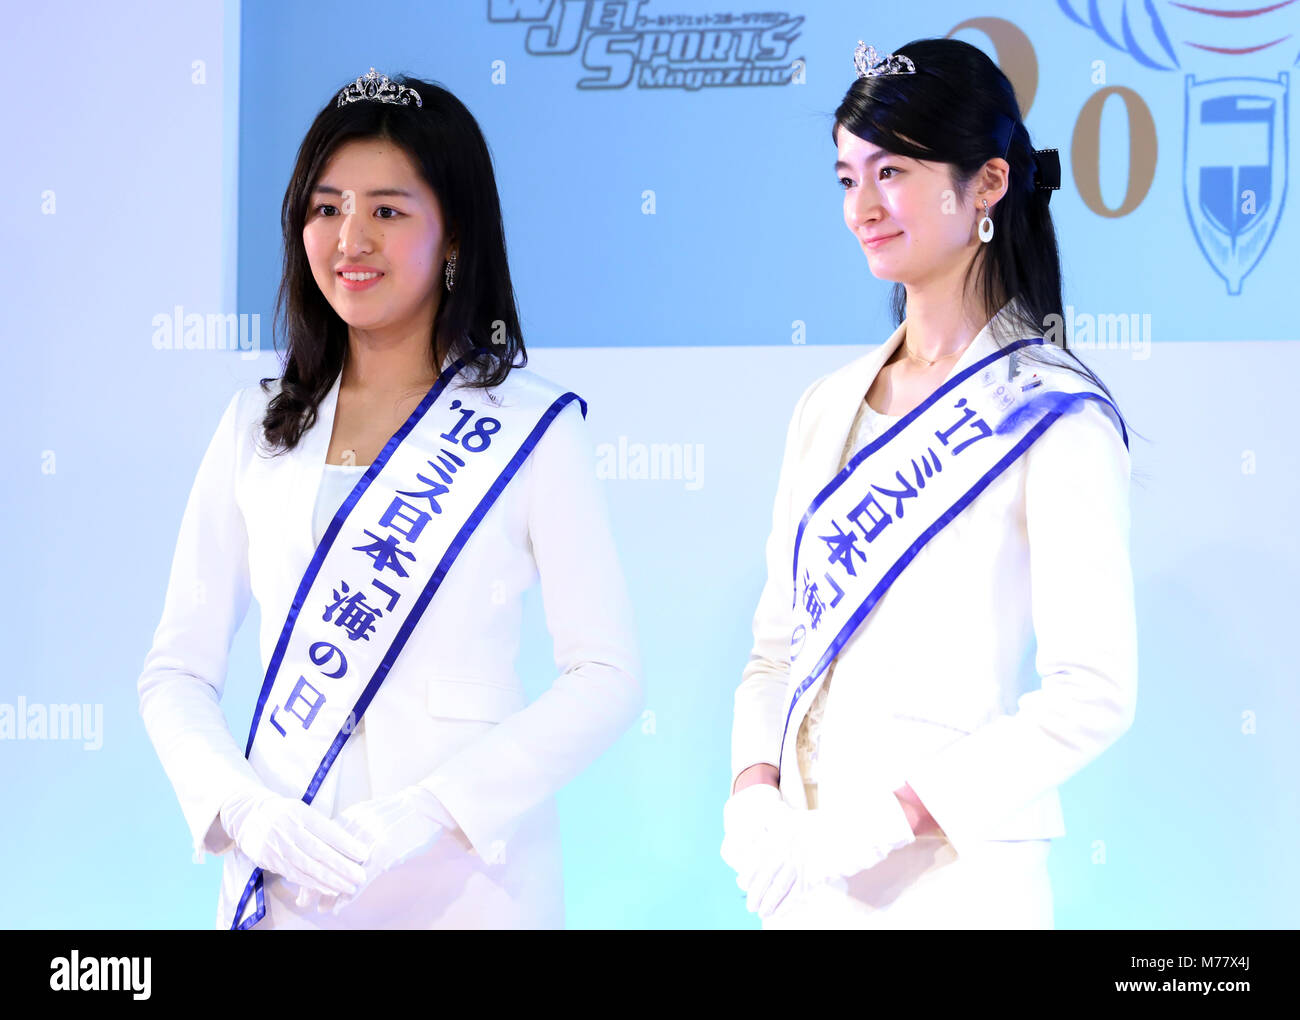 Yokohama, Japan. 8th Mar, 2018. Miss Nippon Marine Day 2017 Yu Mikami (R) and Miss Nippon Marine Day 2018 Remi Yamada (L) attend the awarding ceremony for Japan Boat of the Year at the Japan International Boat Show in Yokohama, suburban Tokyo on Thursday, March 8, 2018. Toyota will strat to sell similar and bigger sized vessel in the United States in 2019 and will put it on the domestic market in 2020. Credit: Yoshio Tsunoda/AFLO/Alamy Live News Stock Photo